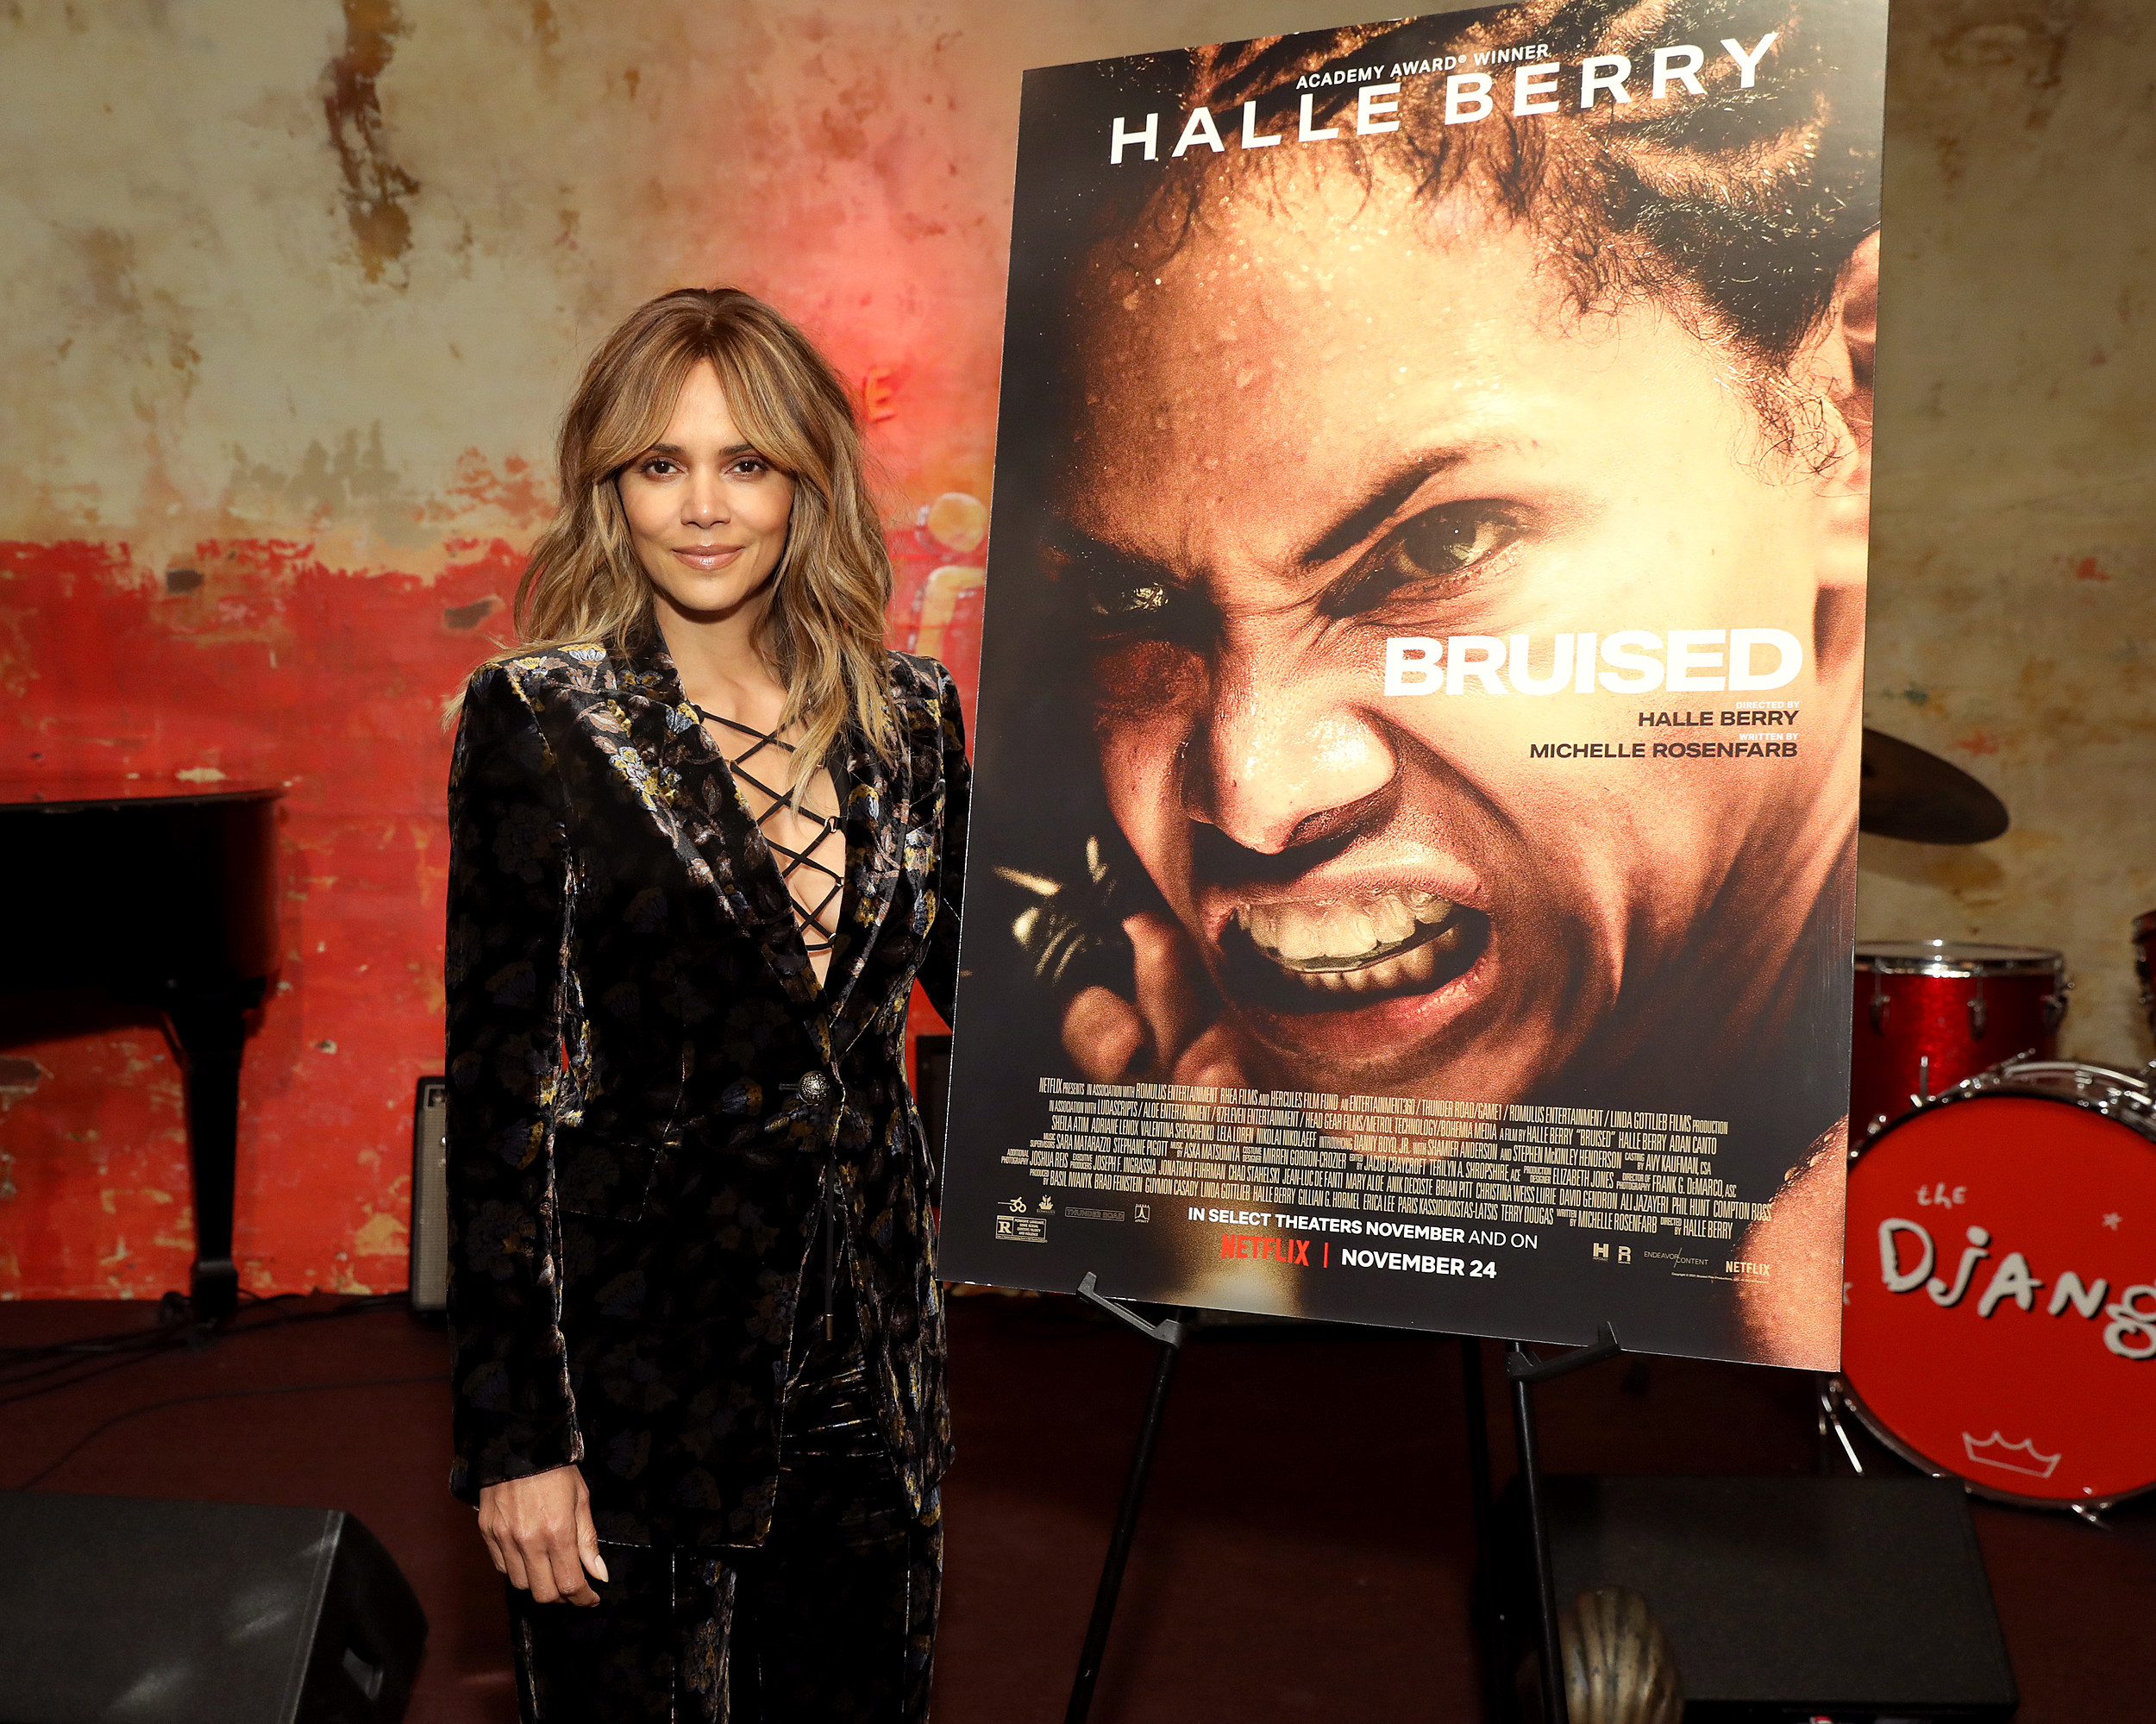 Halle Berry says directing 'Bruised' was 'one of hardest things I